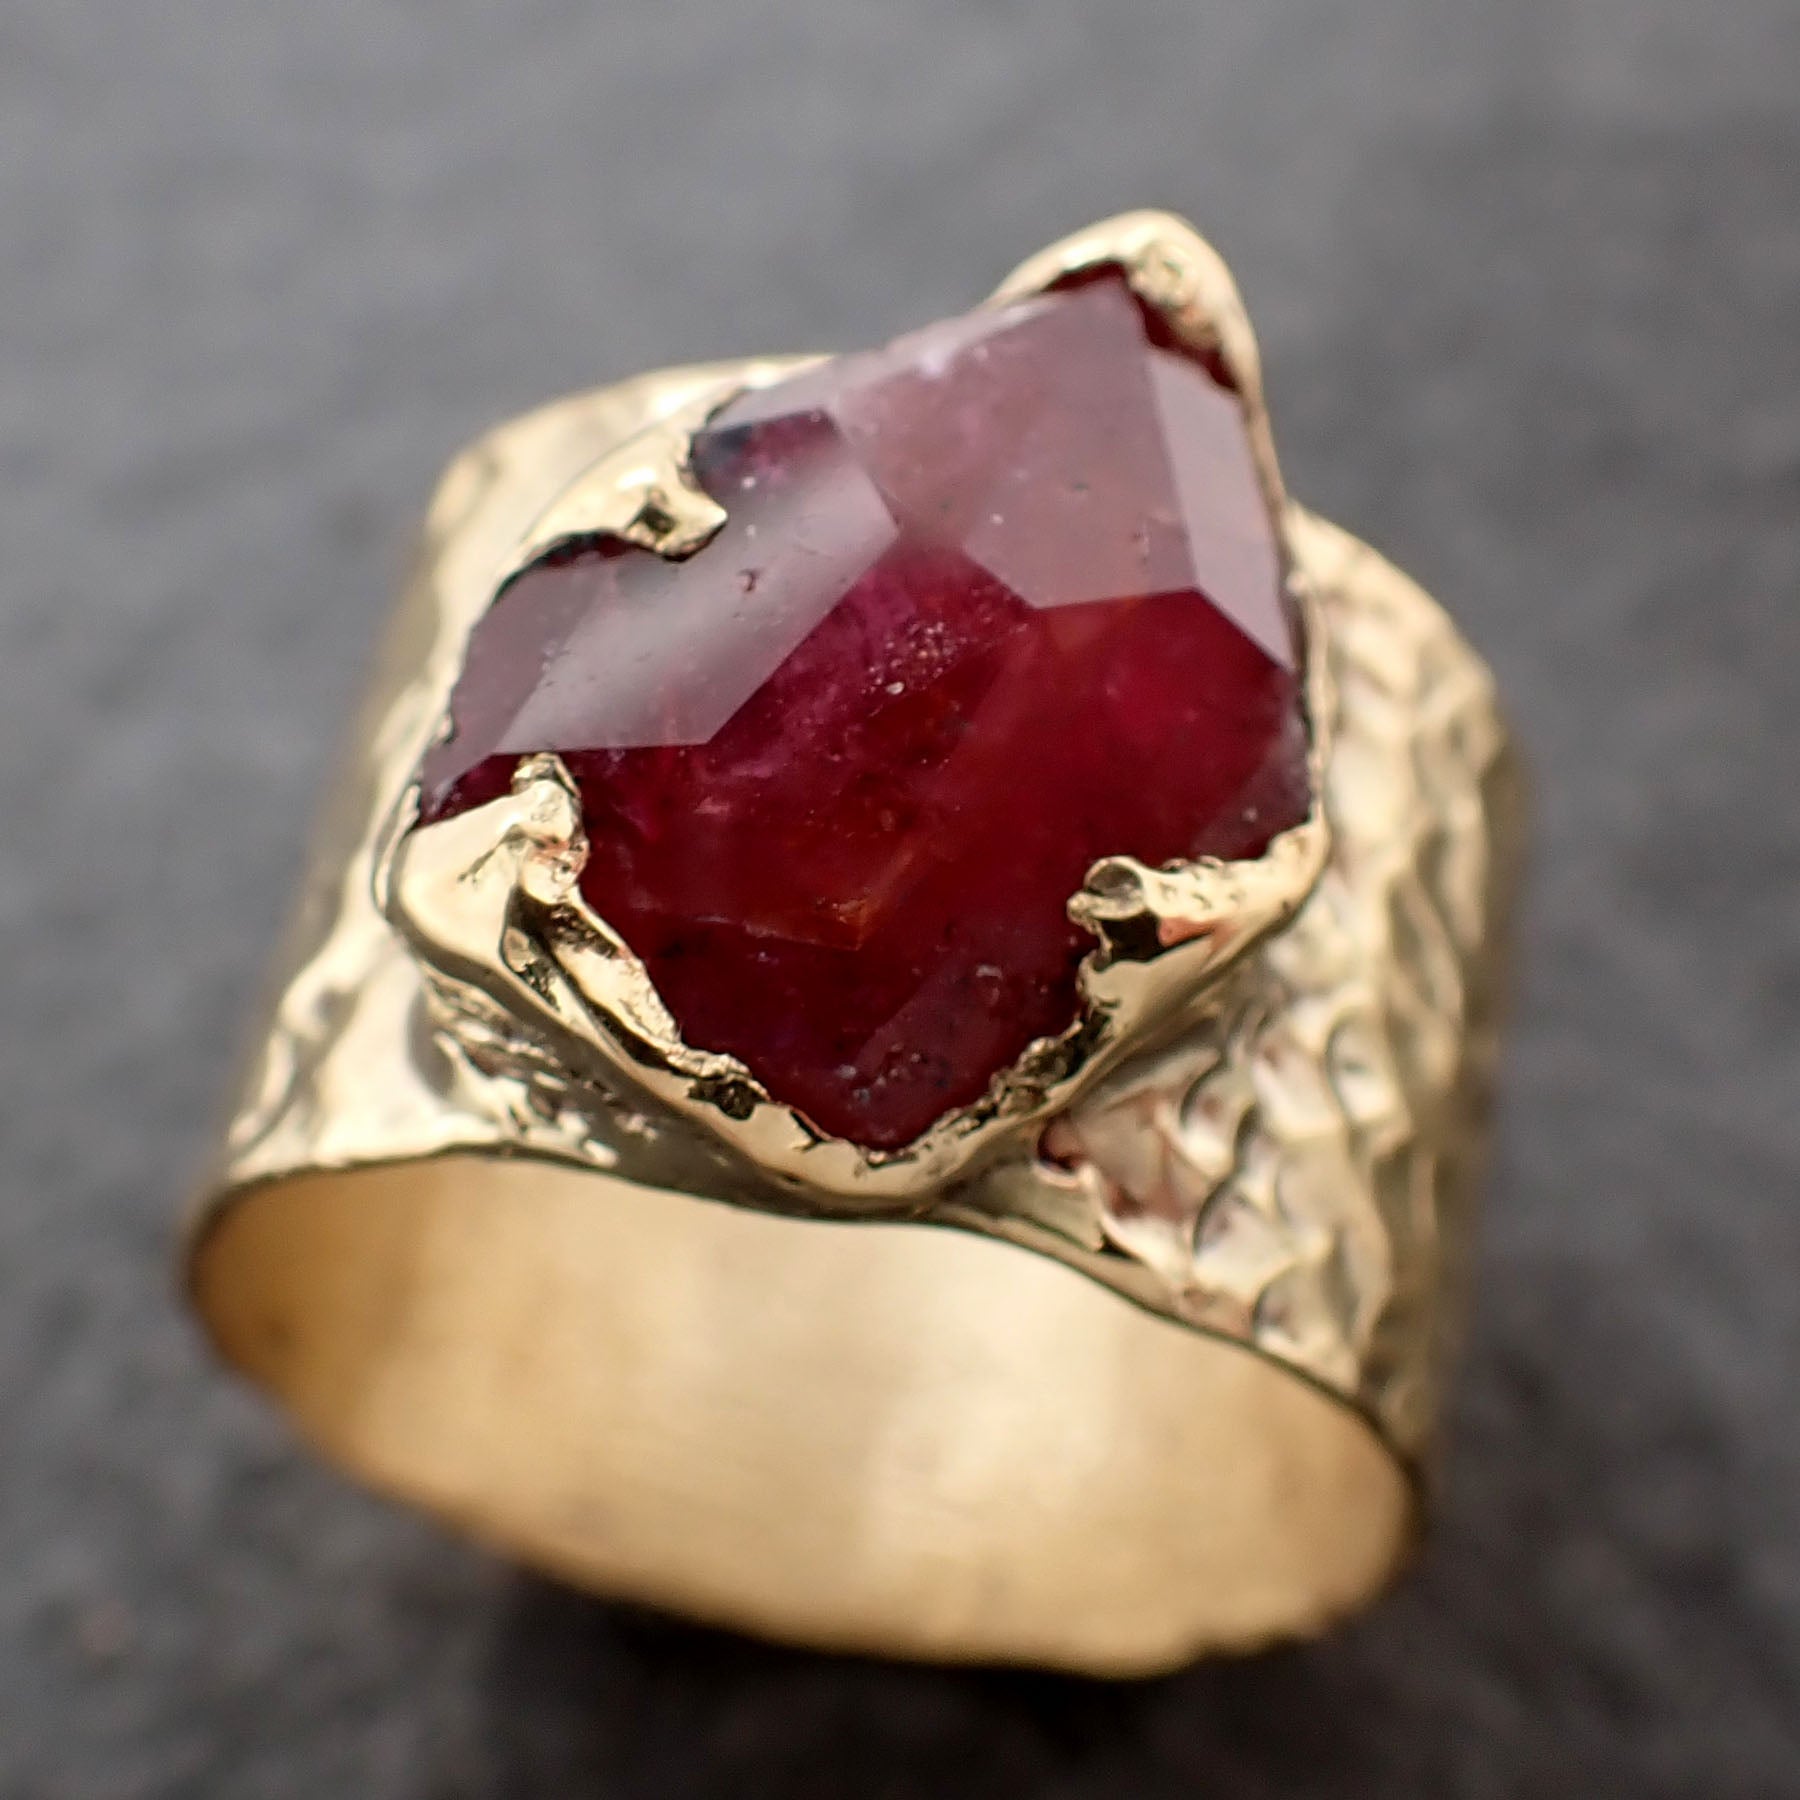 Partially Faceted Ruby Sapphire Ring Gemstone Ring Cocktail Solitaire Yellow 18k Cigar band 3218